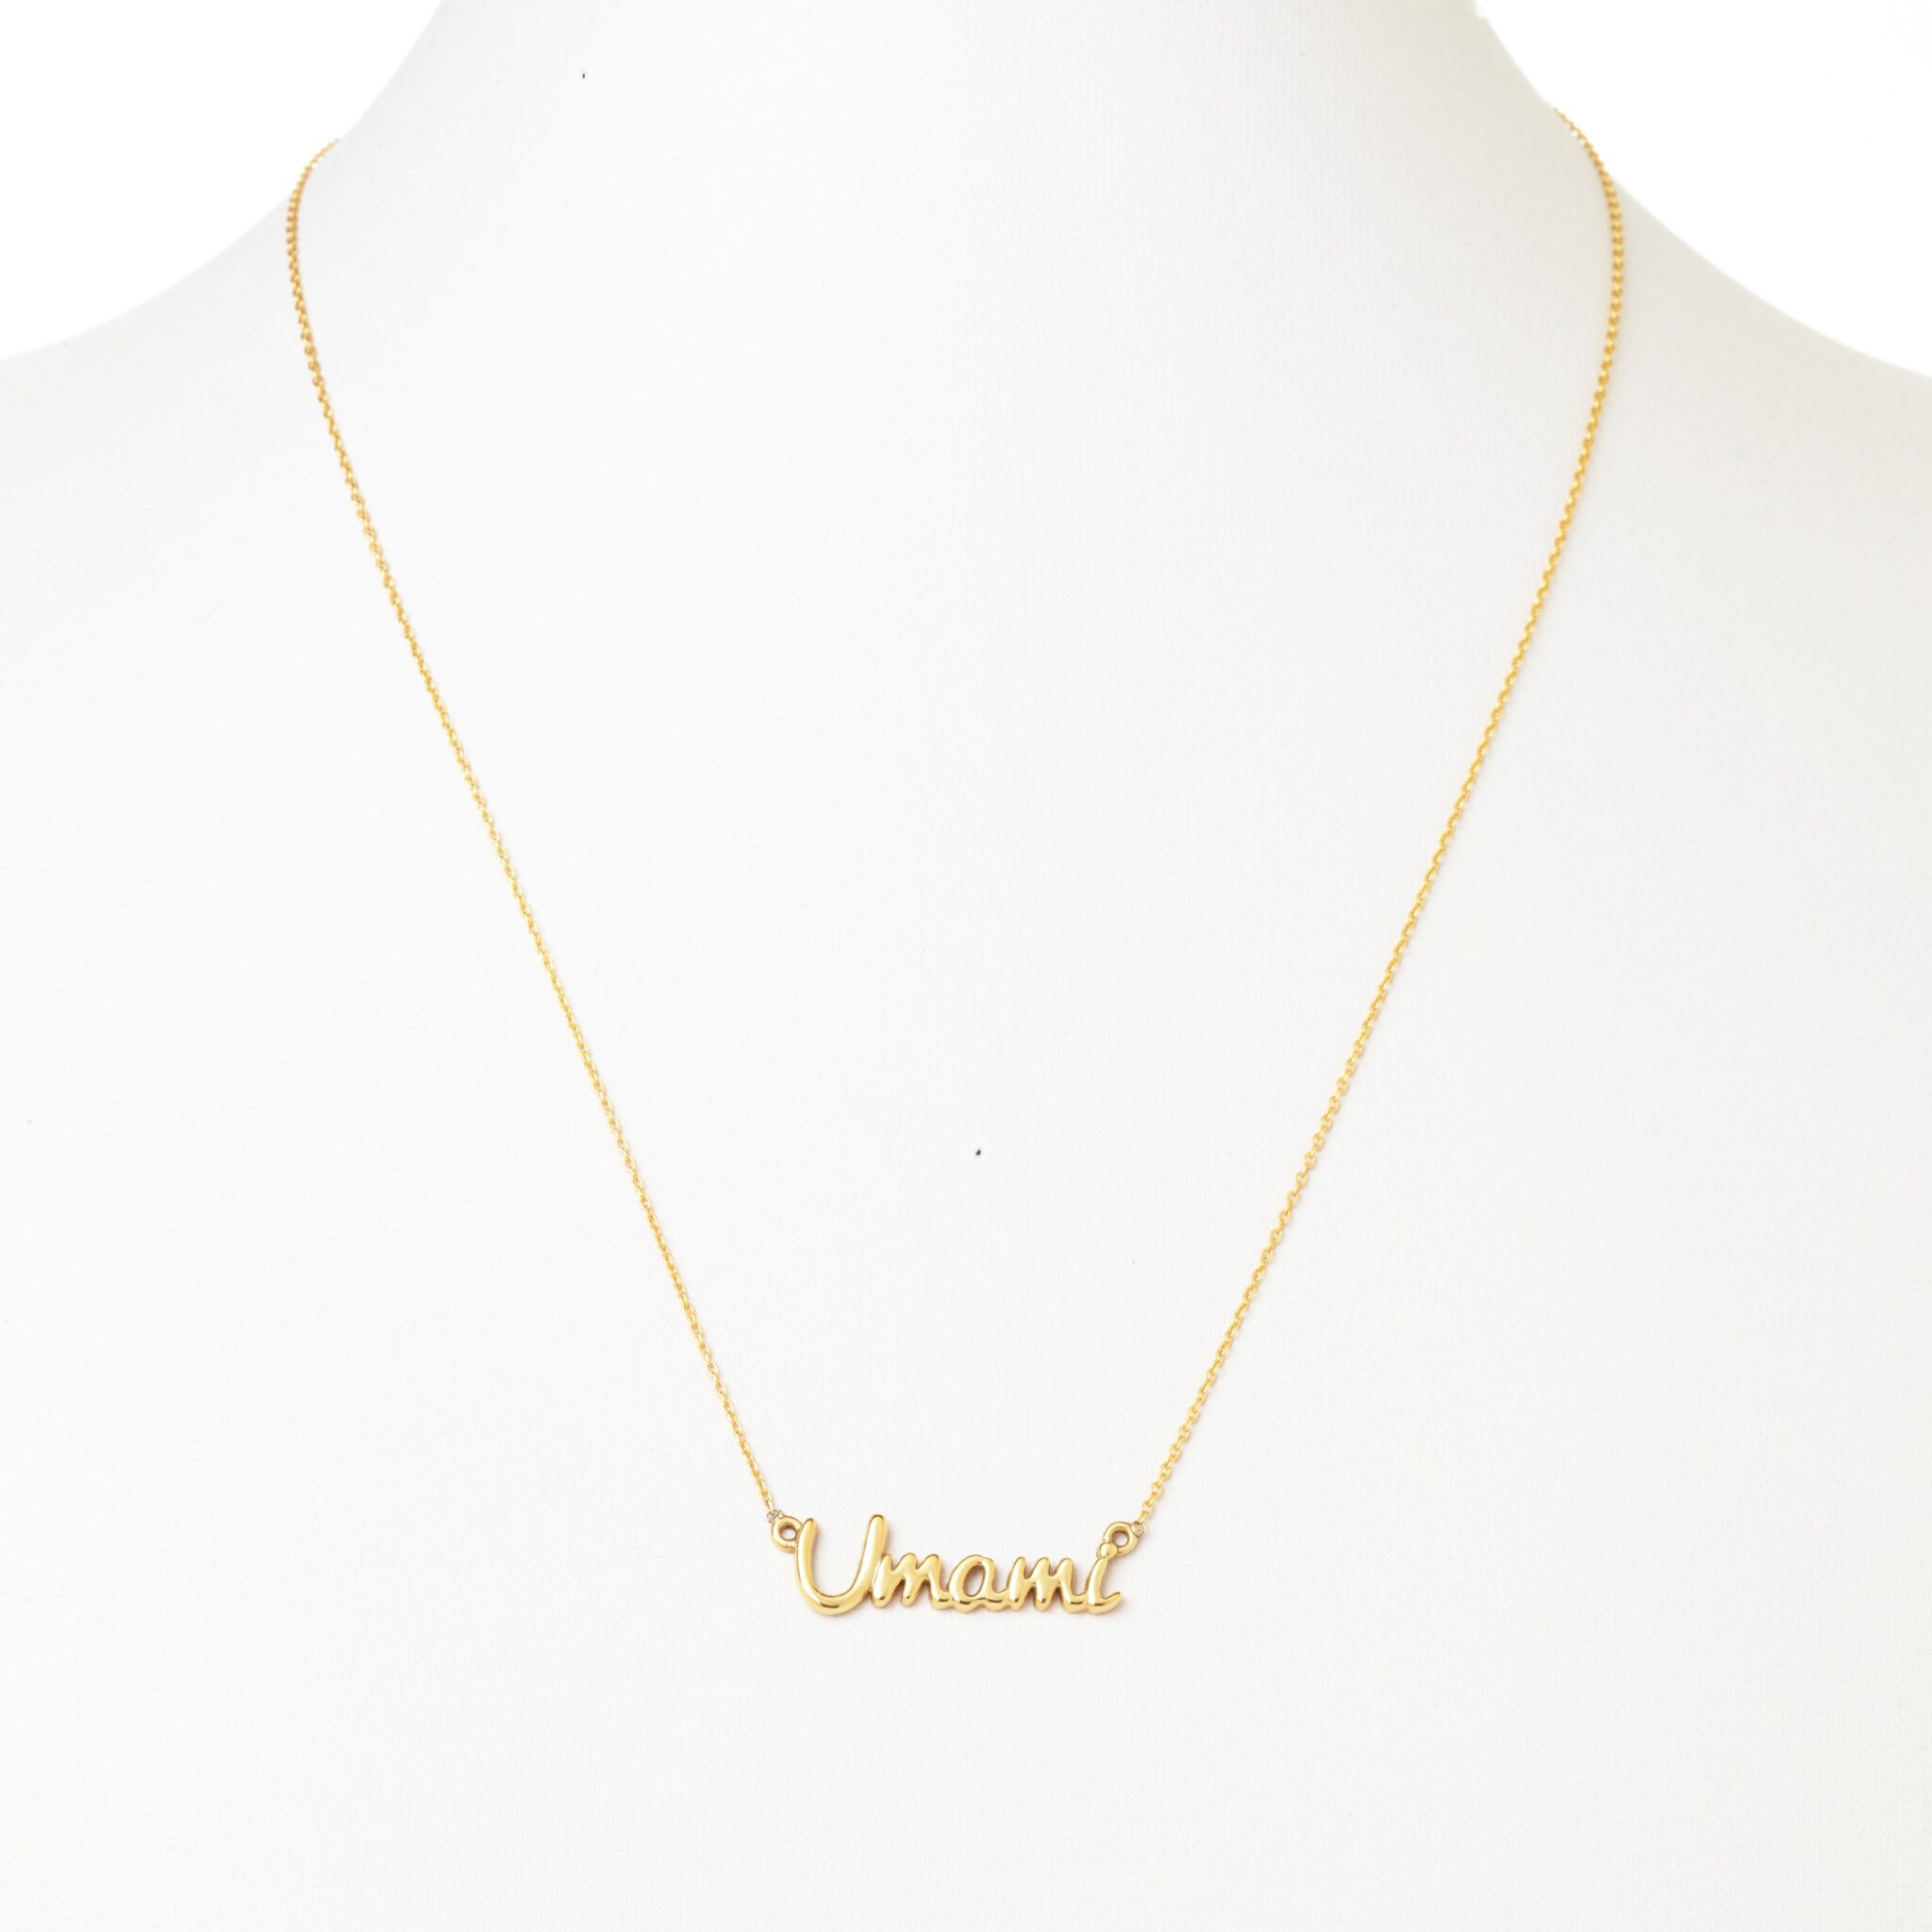 Umami Necklace, Yellow Gold Plated - Delicacies